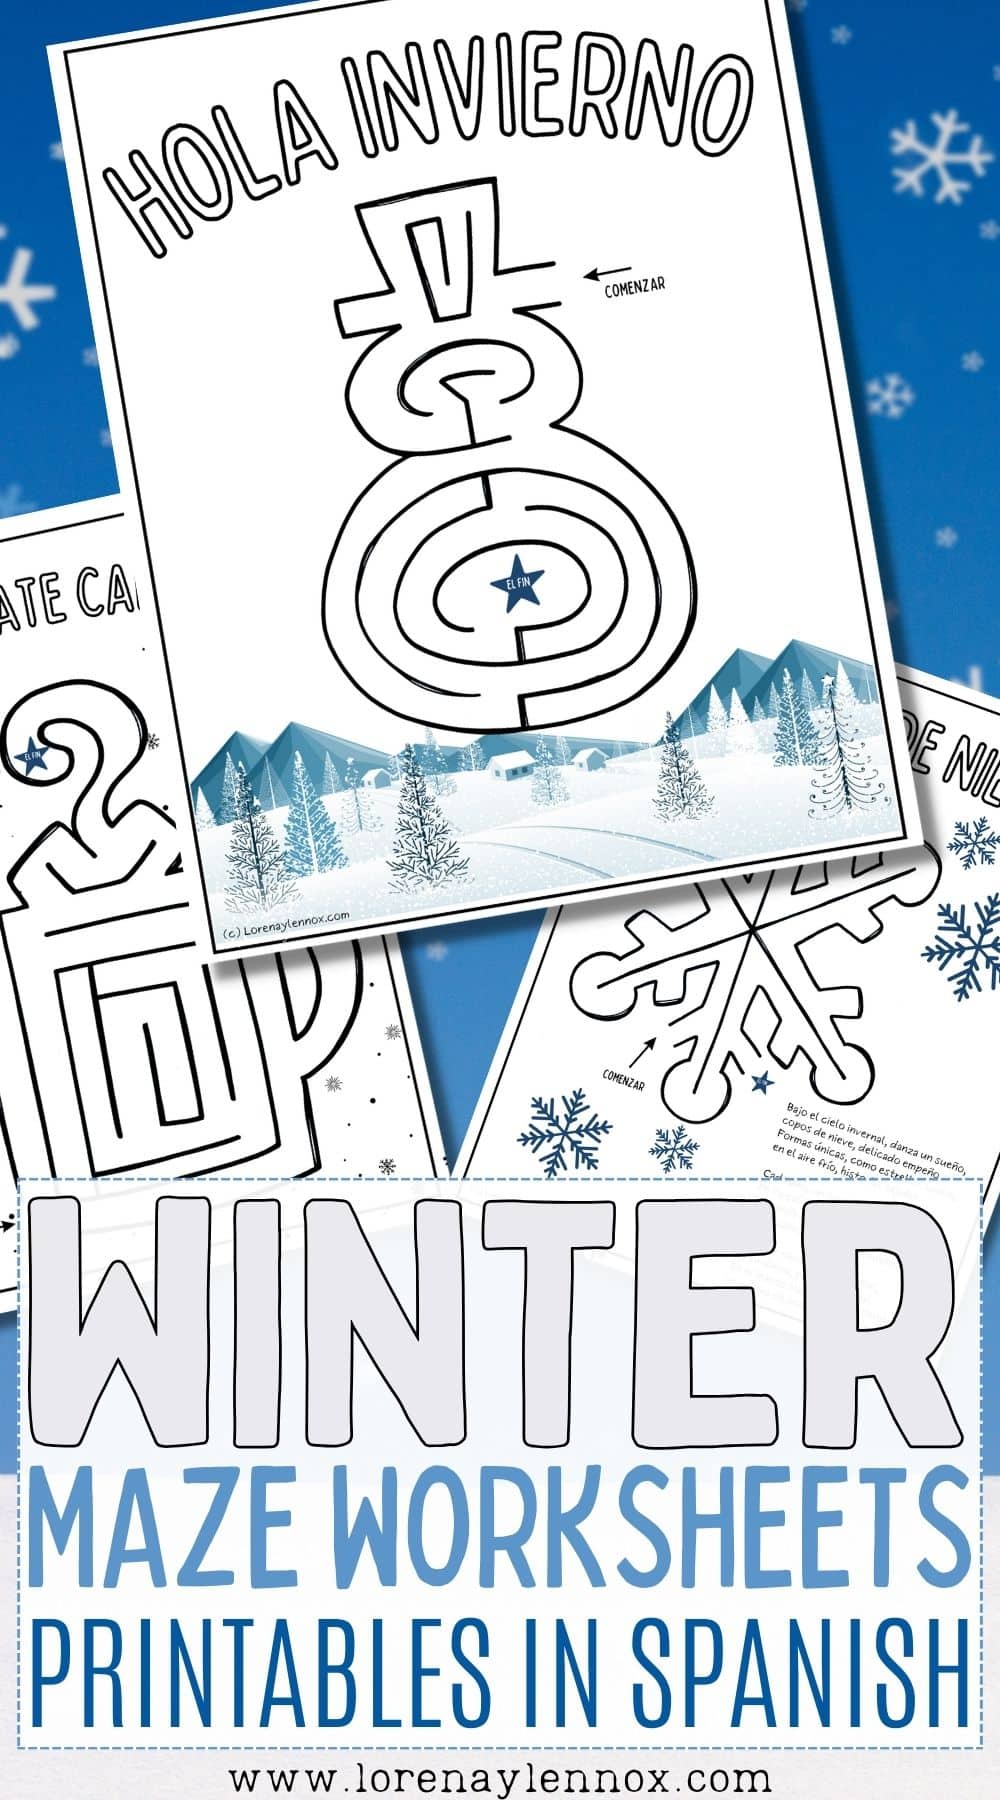 Navigate through the winter wonderland with our 5 free printable maze worksheets in Spanish! 🌨️❄️ Perfect for language learning and fun, these mazes bring a touch of seasonal excitement to your educational journey. Download now and let the winter adventure begin! 🧩✨ #WinterMaze #Printables #SpanishLearning